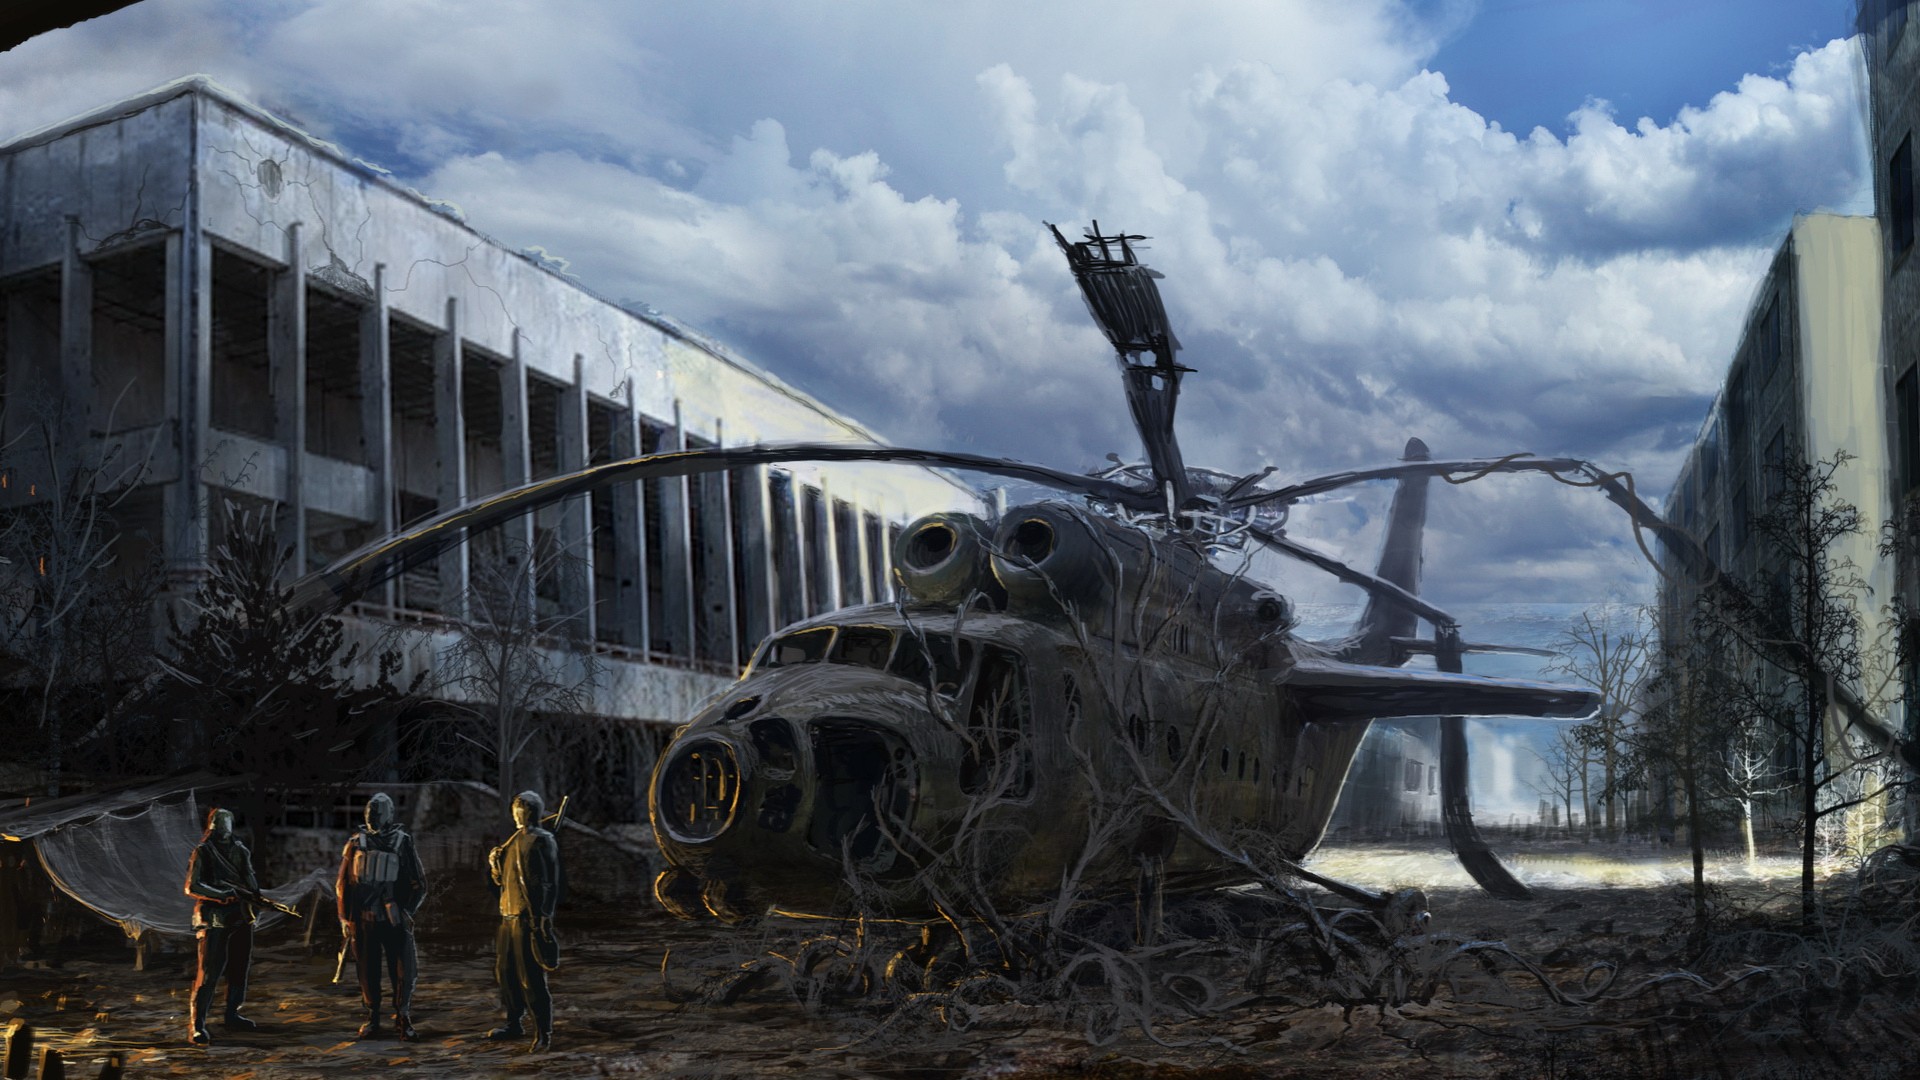 General 1920x1080 digital art fantasy art drawing men soldier helicopters apocalyptic building clouds roots trees S.T.A.L.K.E.R. video game art PC gaming wreck aircraft ruins artwork